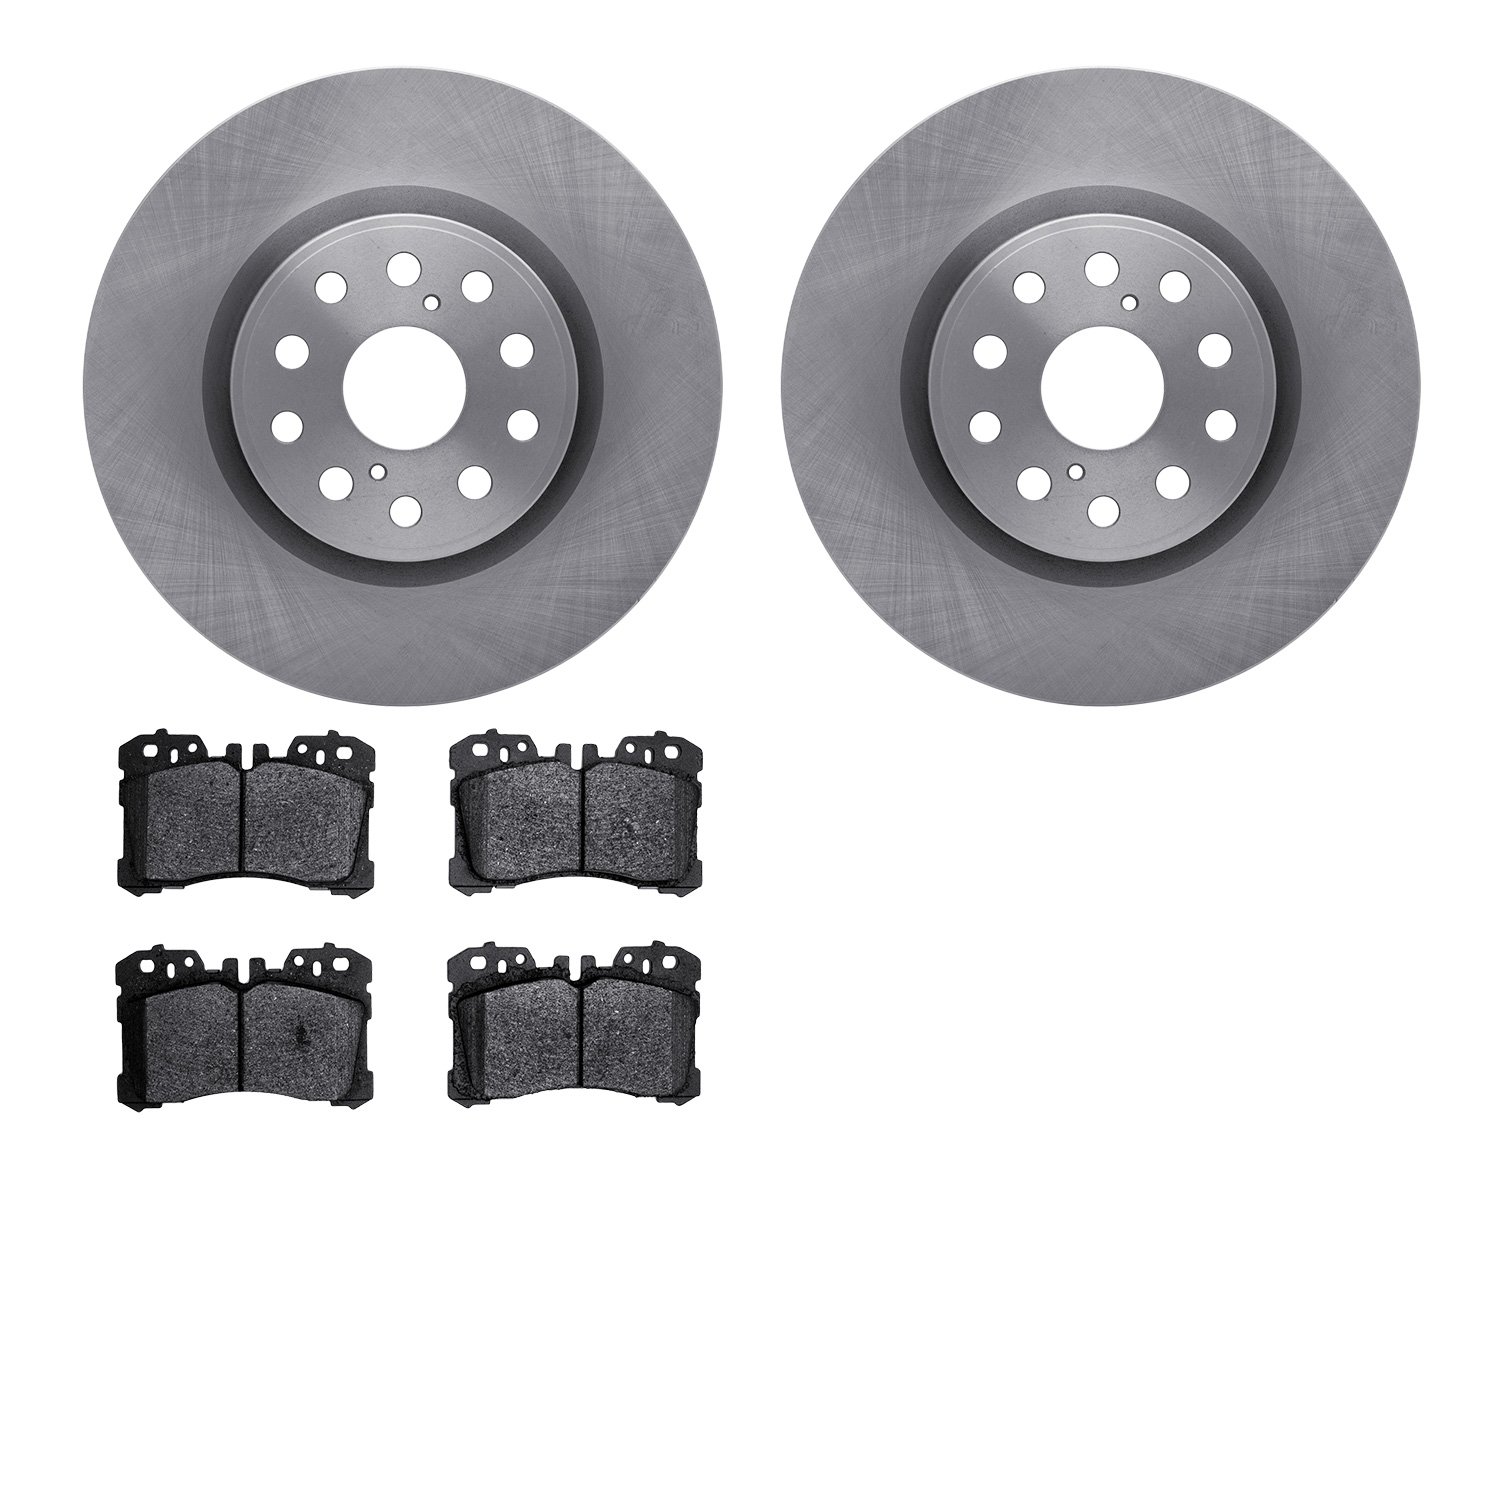 6302-75024 Brake Rotors with 3000-Series Ceramic Brake Pads Kit, Fits Select Lexus/Toyota/Scion, Position: Front